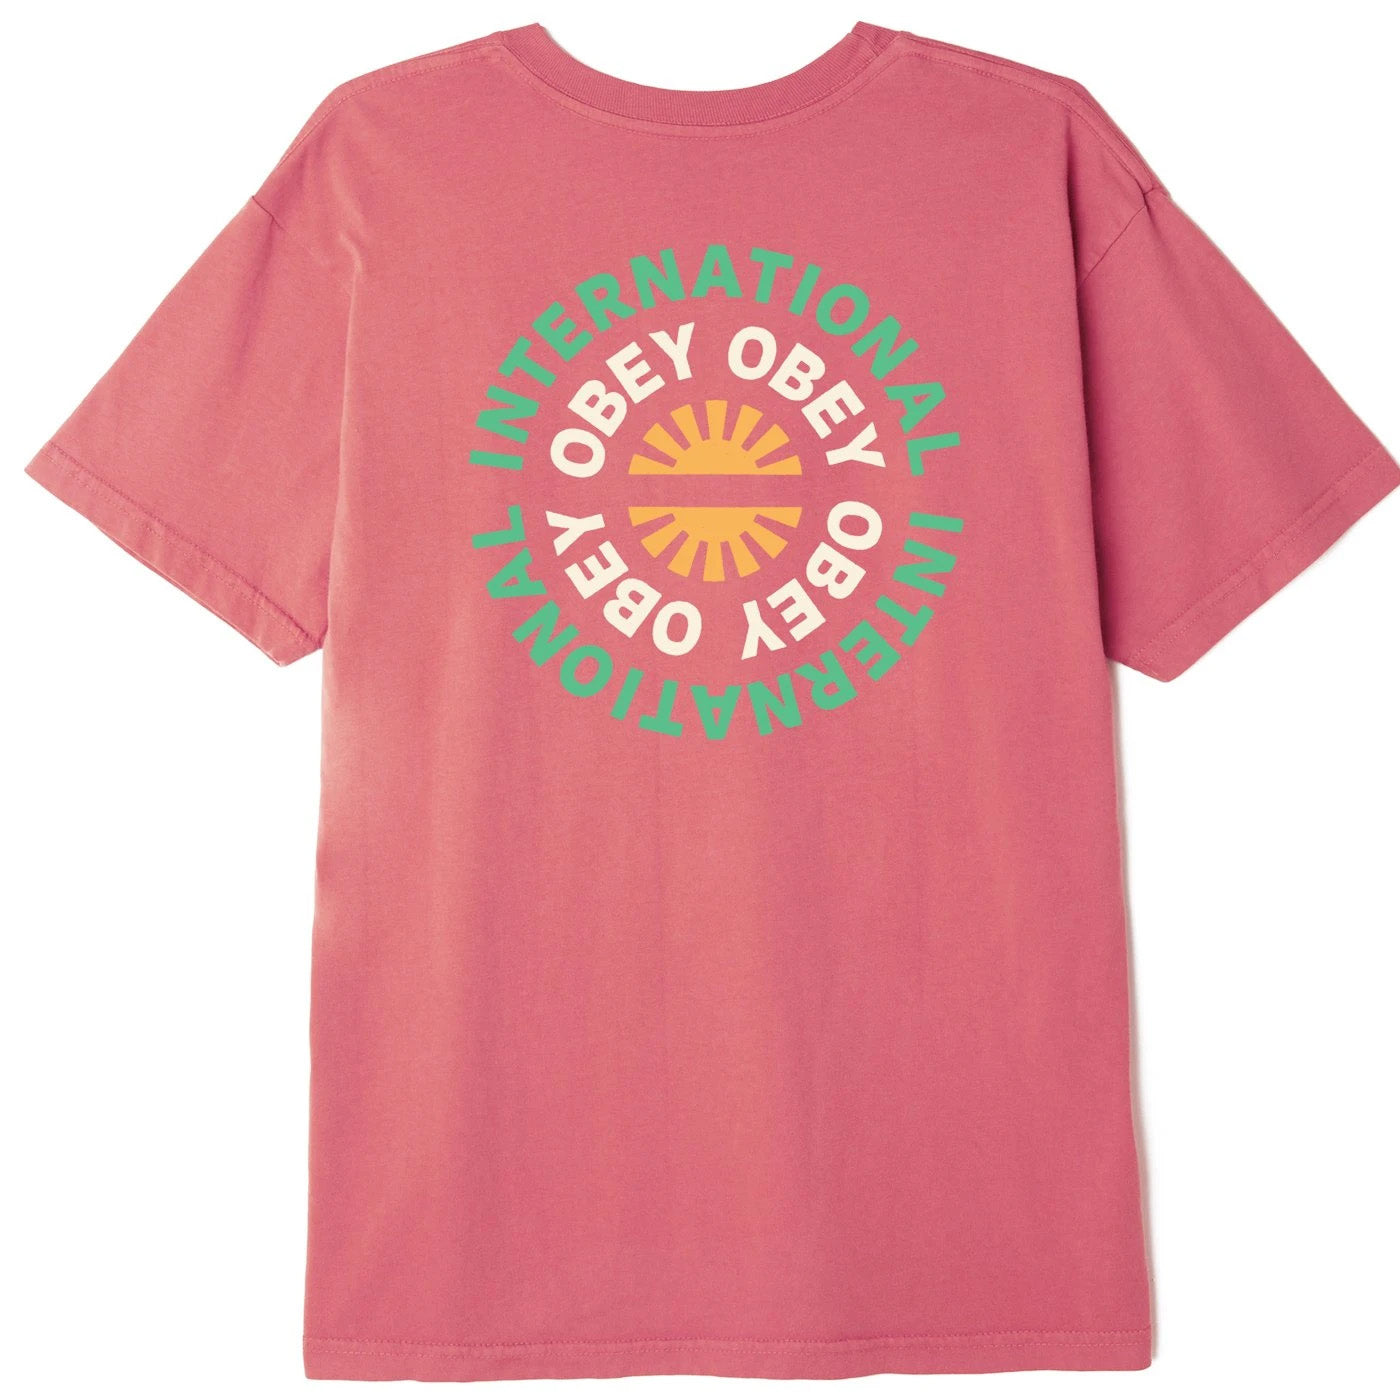 Obey Supply and Demand Organic T shirt - Pink